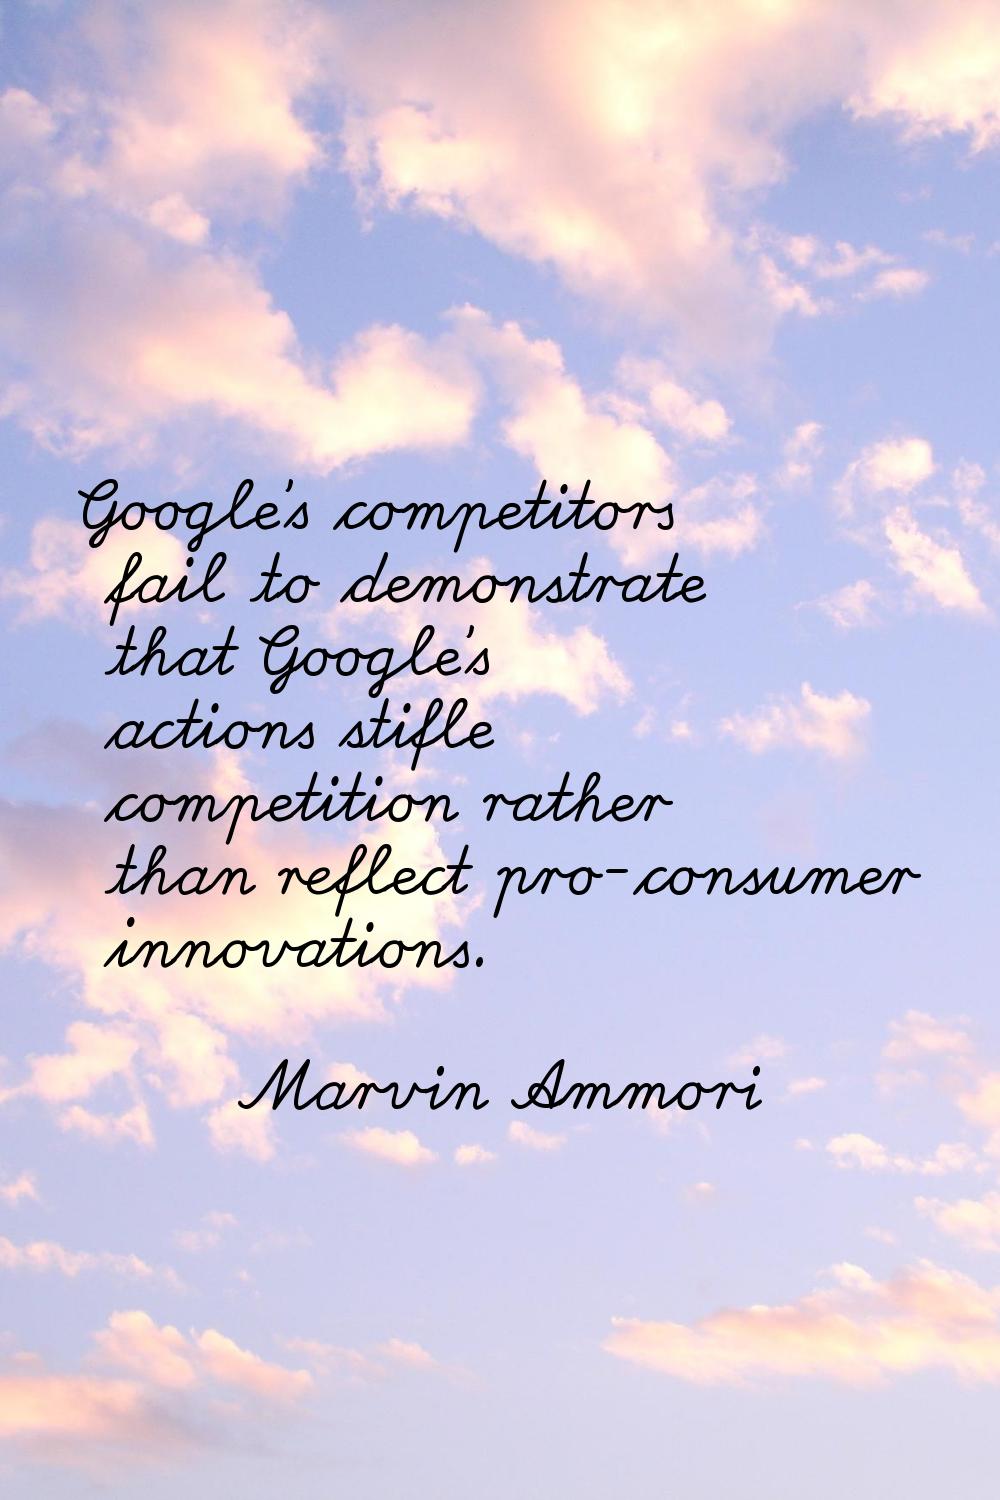 Google's competitors fail to demonstrate that Google's actions stifle competition rather than refle